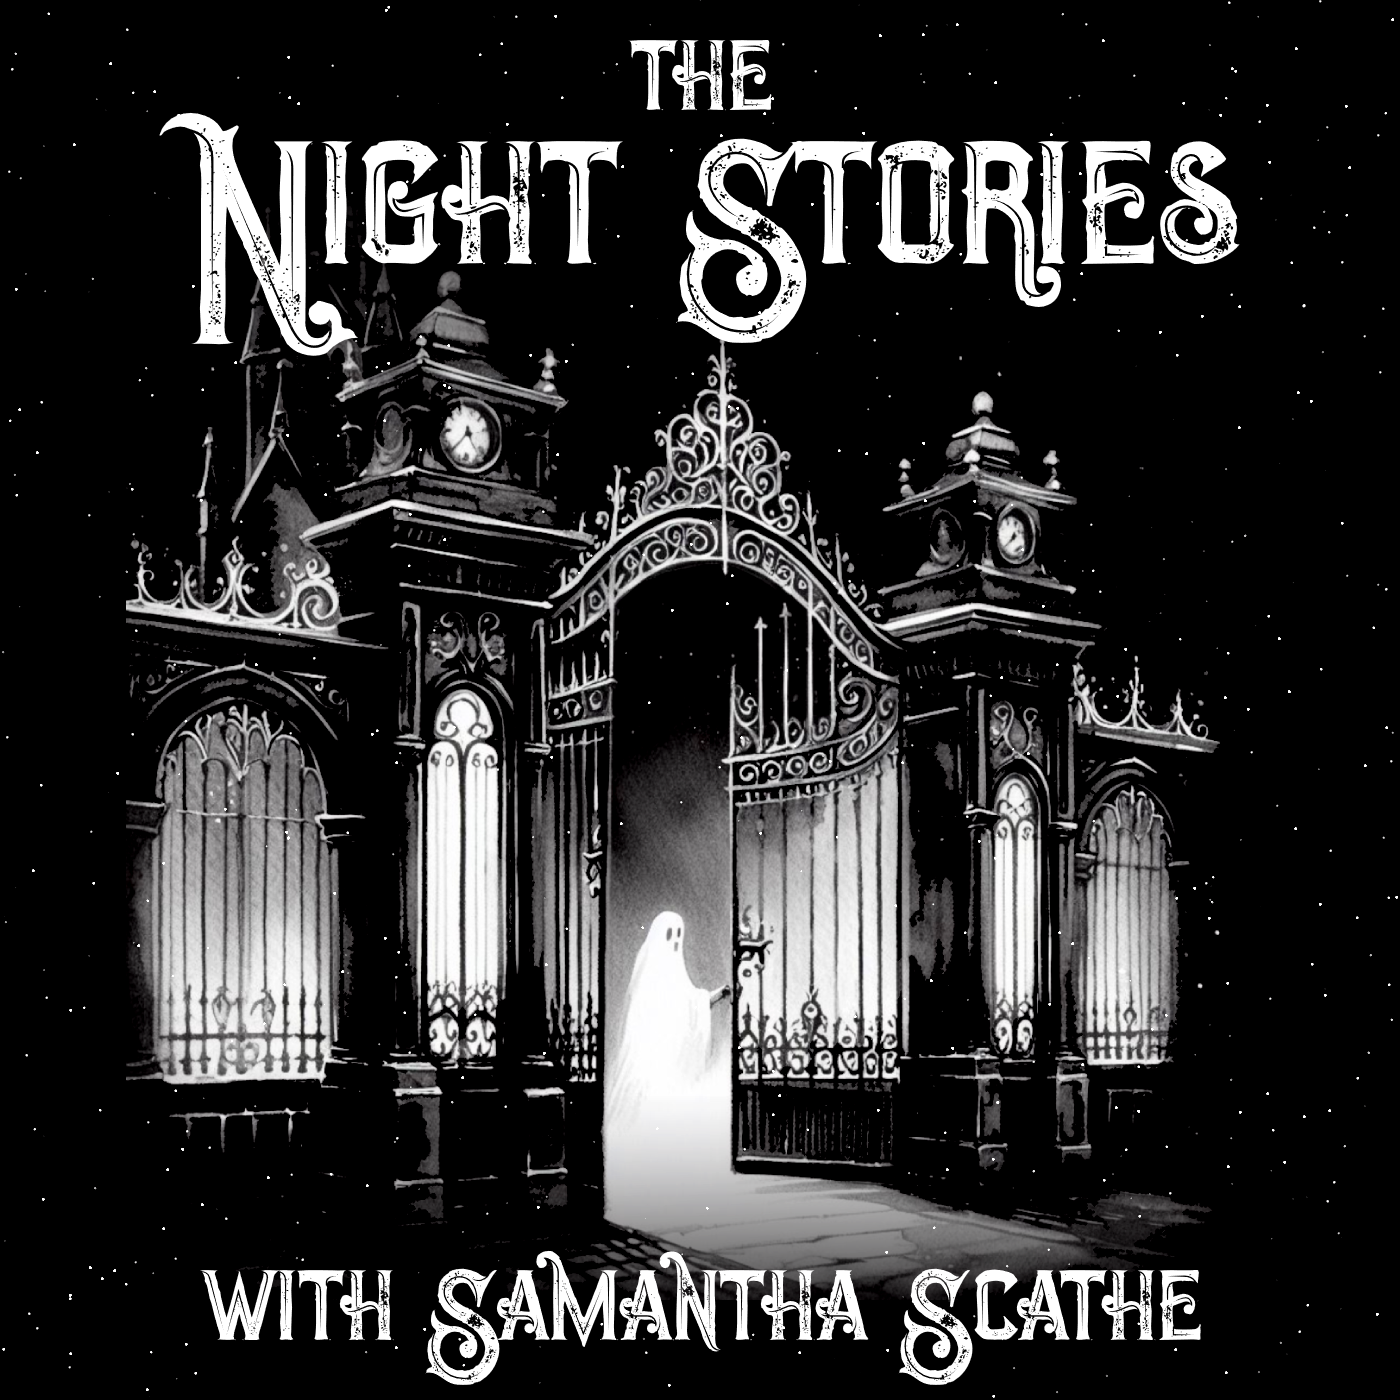 A creepy haunted mansion with a ghost opening the gate for you; The Night Stories with Samantha Scathe